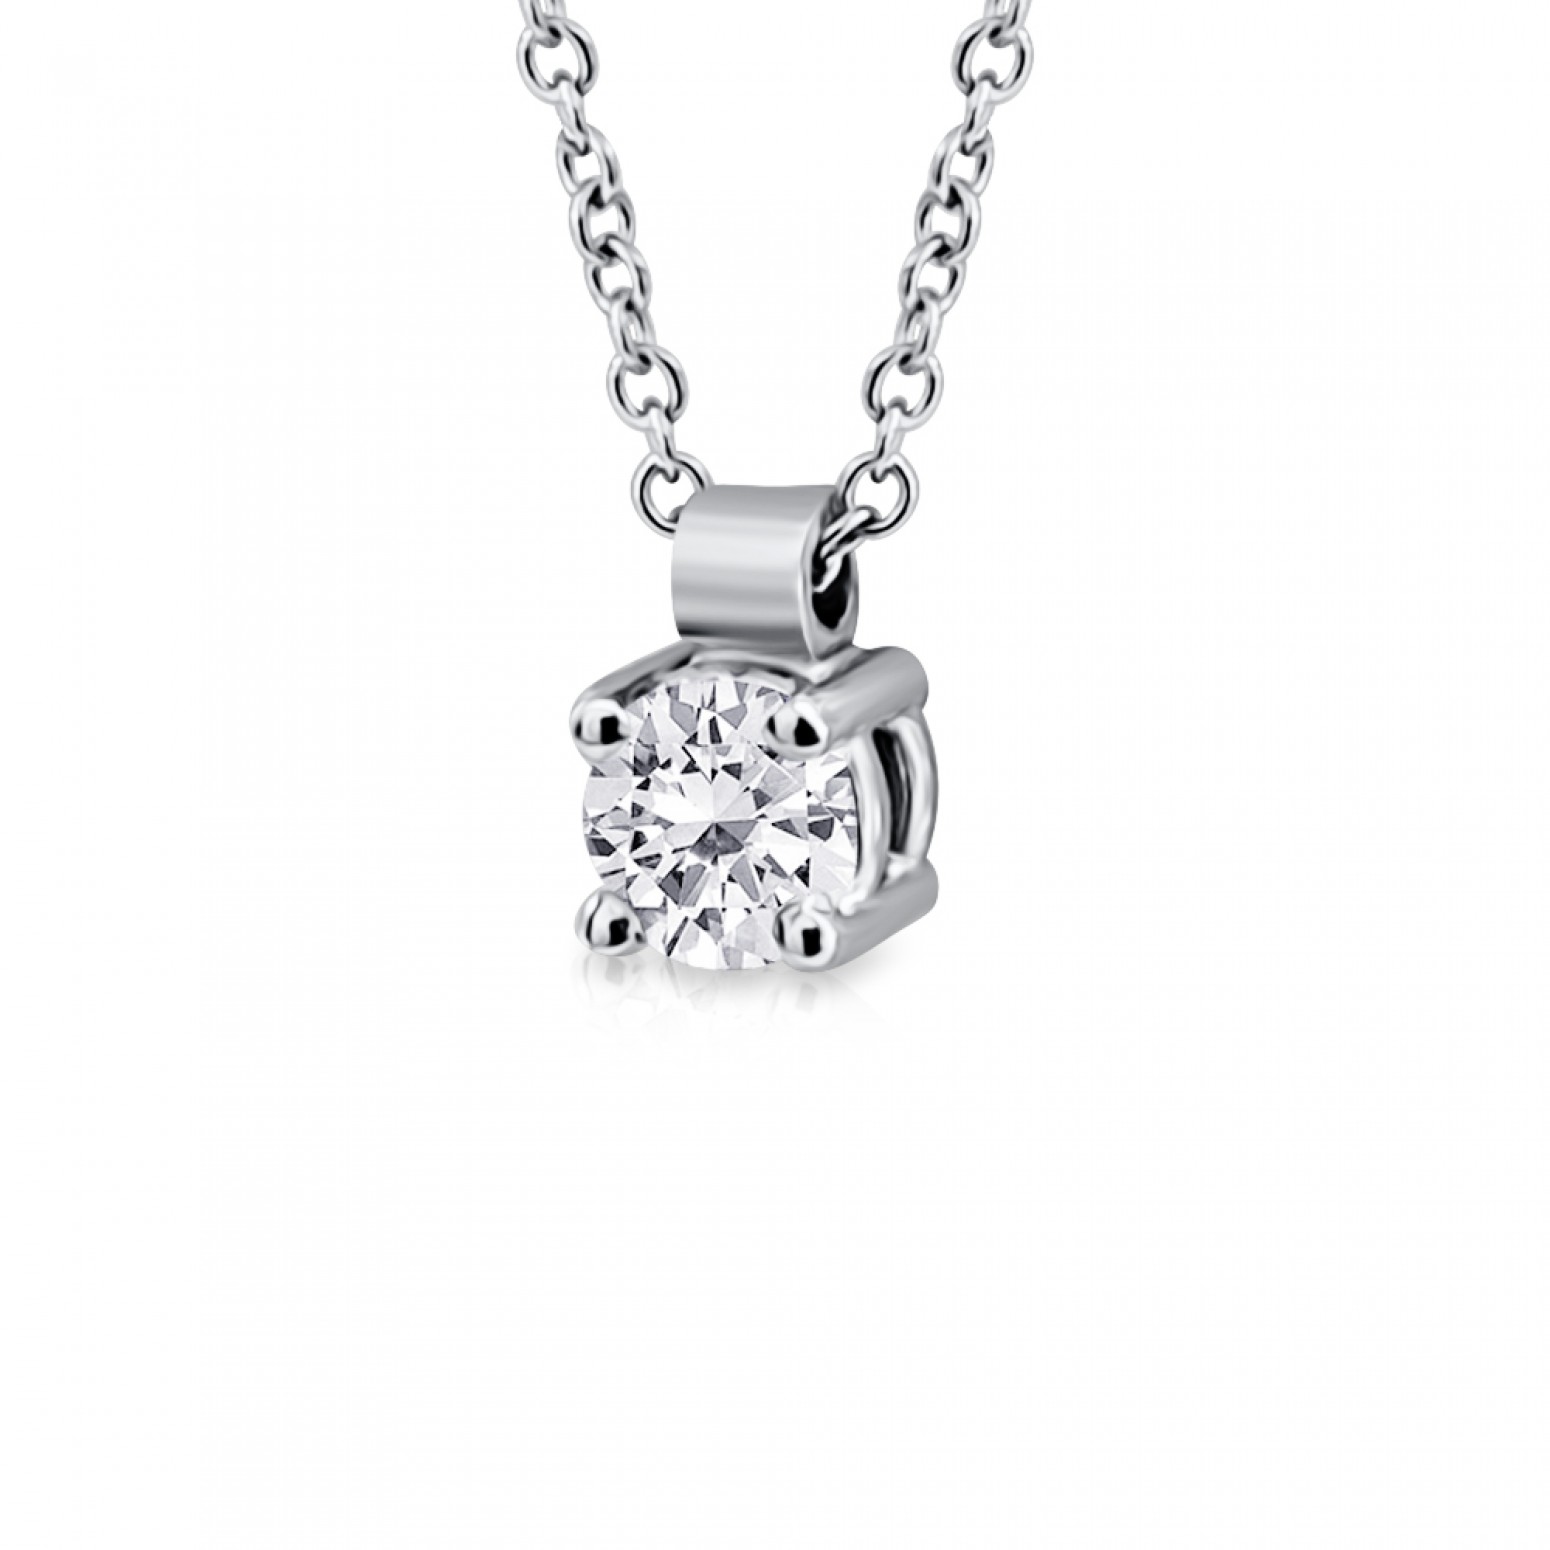 Solitaire necklace 18K white gold with diamond 0.16ct, SI1, H from IGL ko4821 NECKLACES Κοσμηματα - chrilia.gr